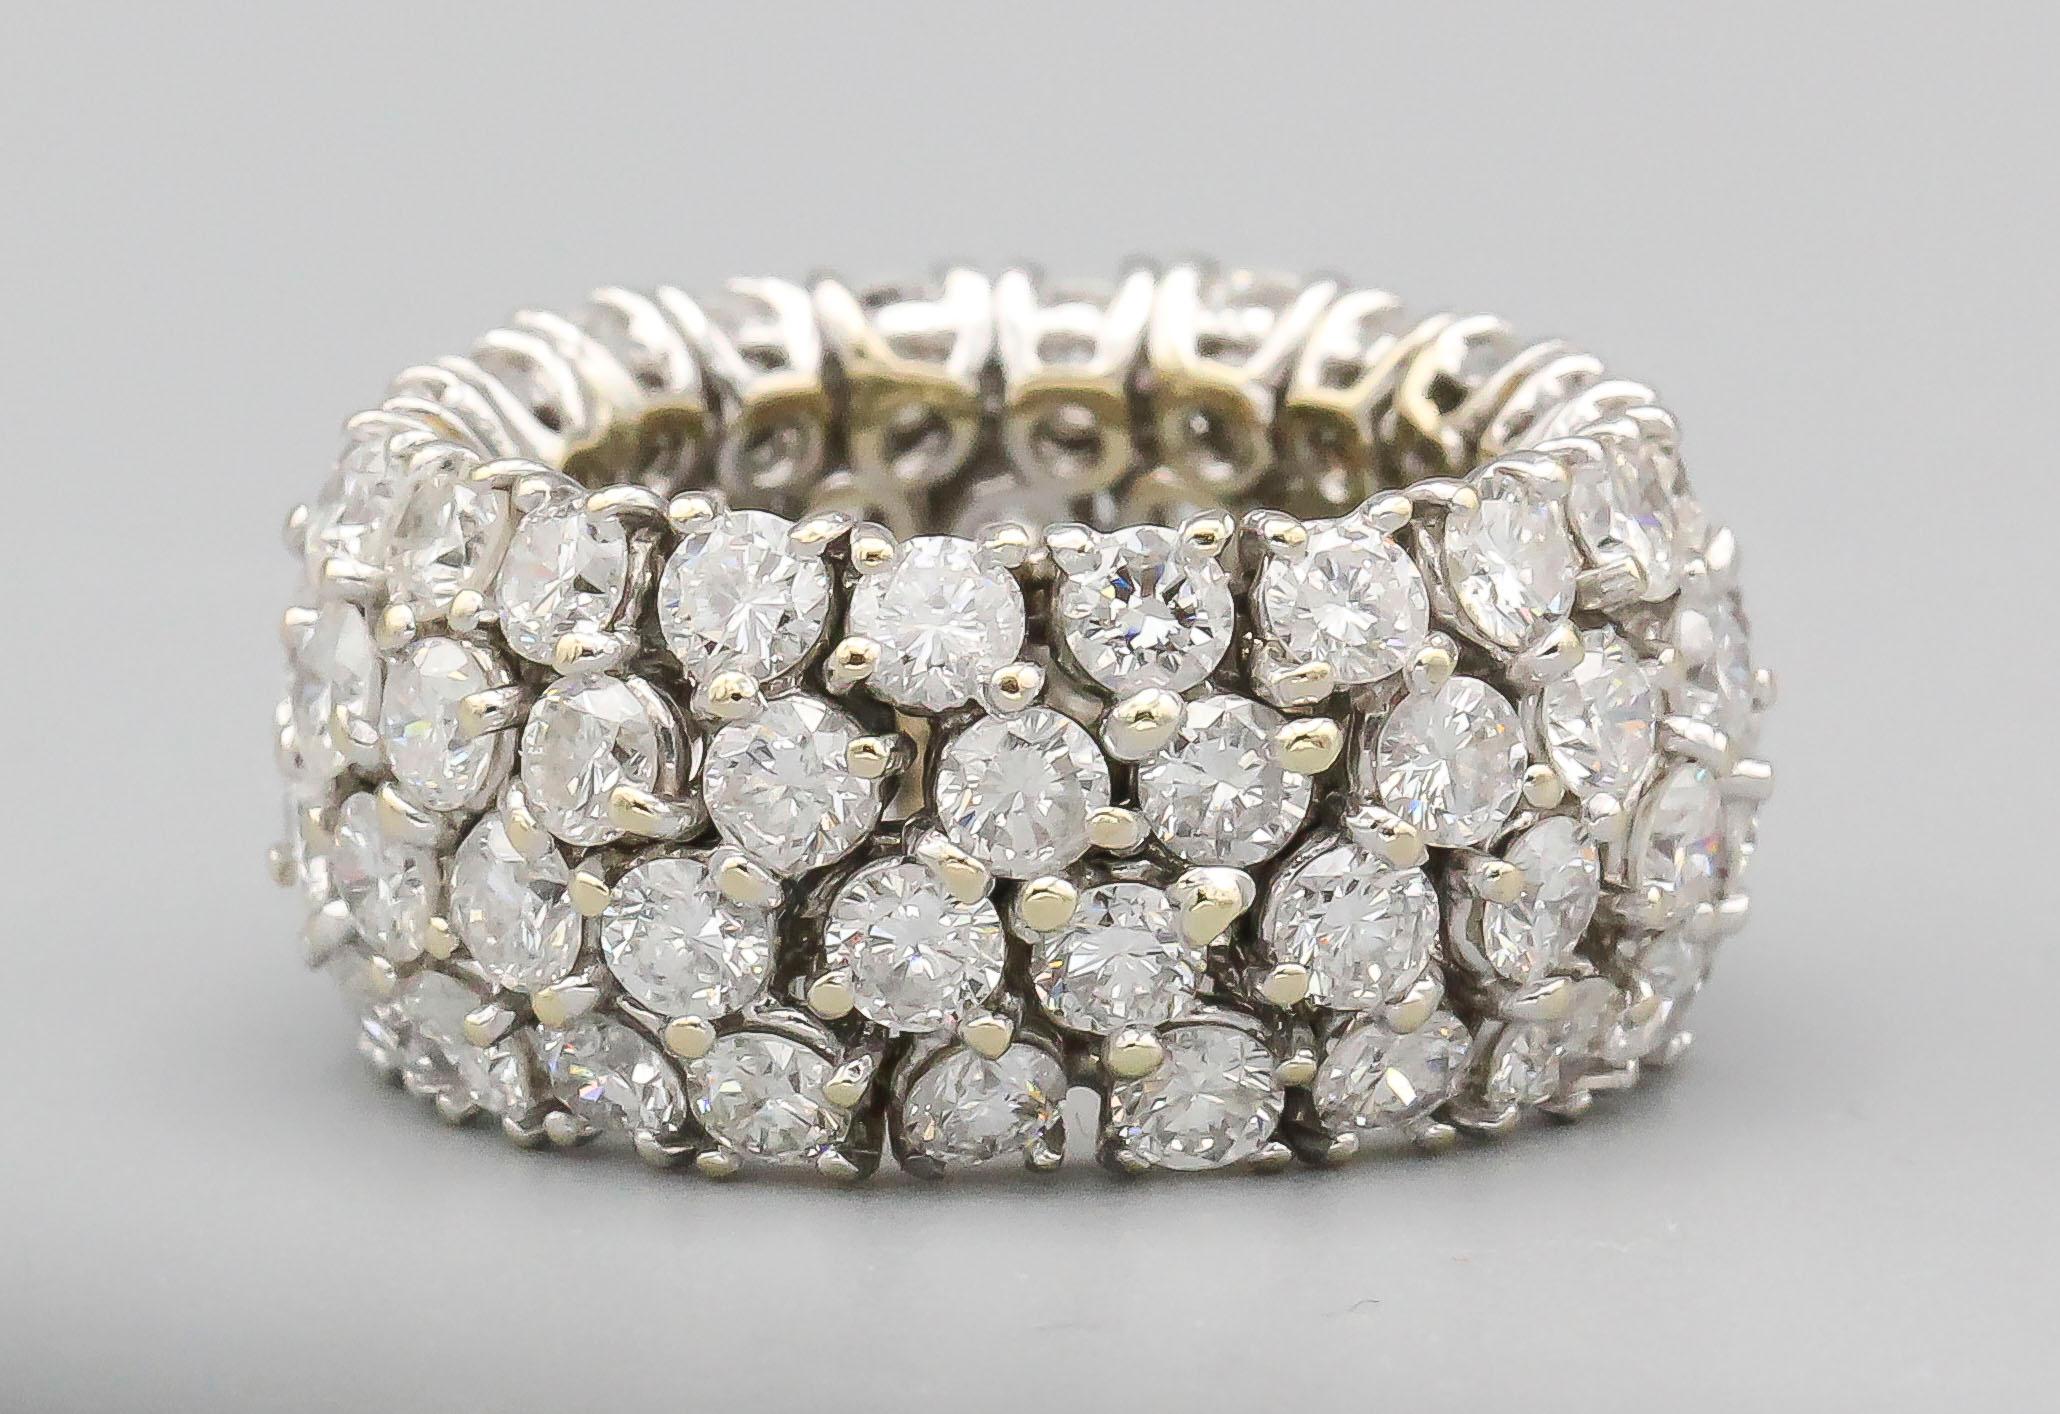 Fine diamond and 18k white gold band of flexible design.  Features approx. 6.5-7.0 carats of round brilliant cut diamonds of high color and clarity.  The 